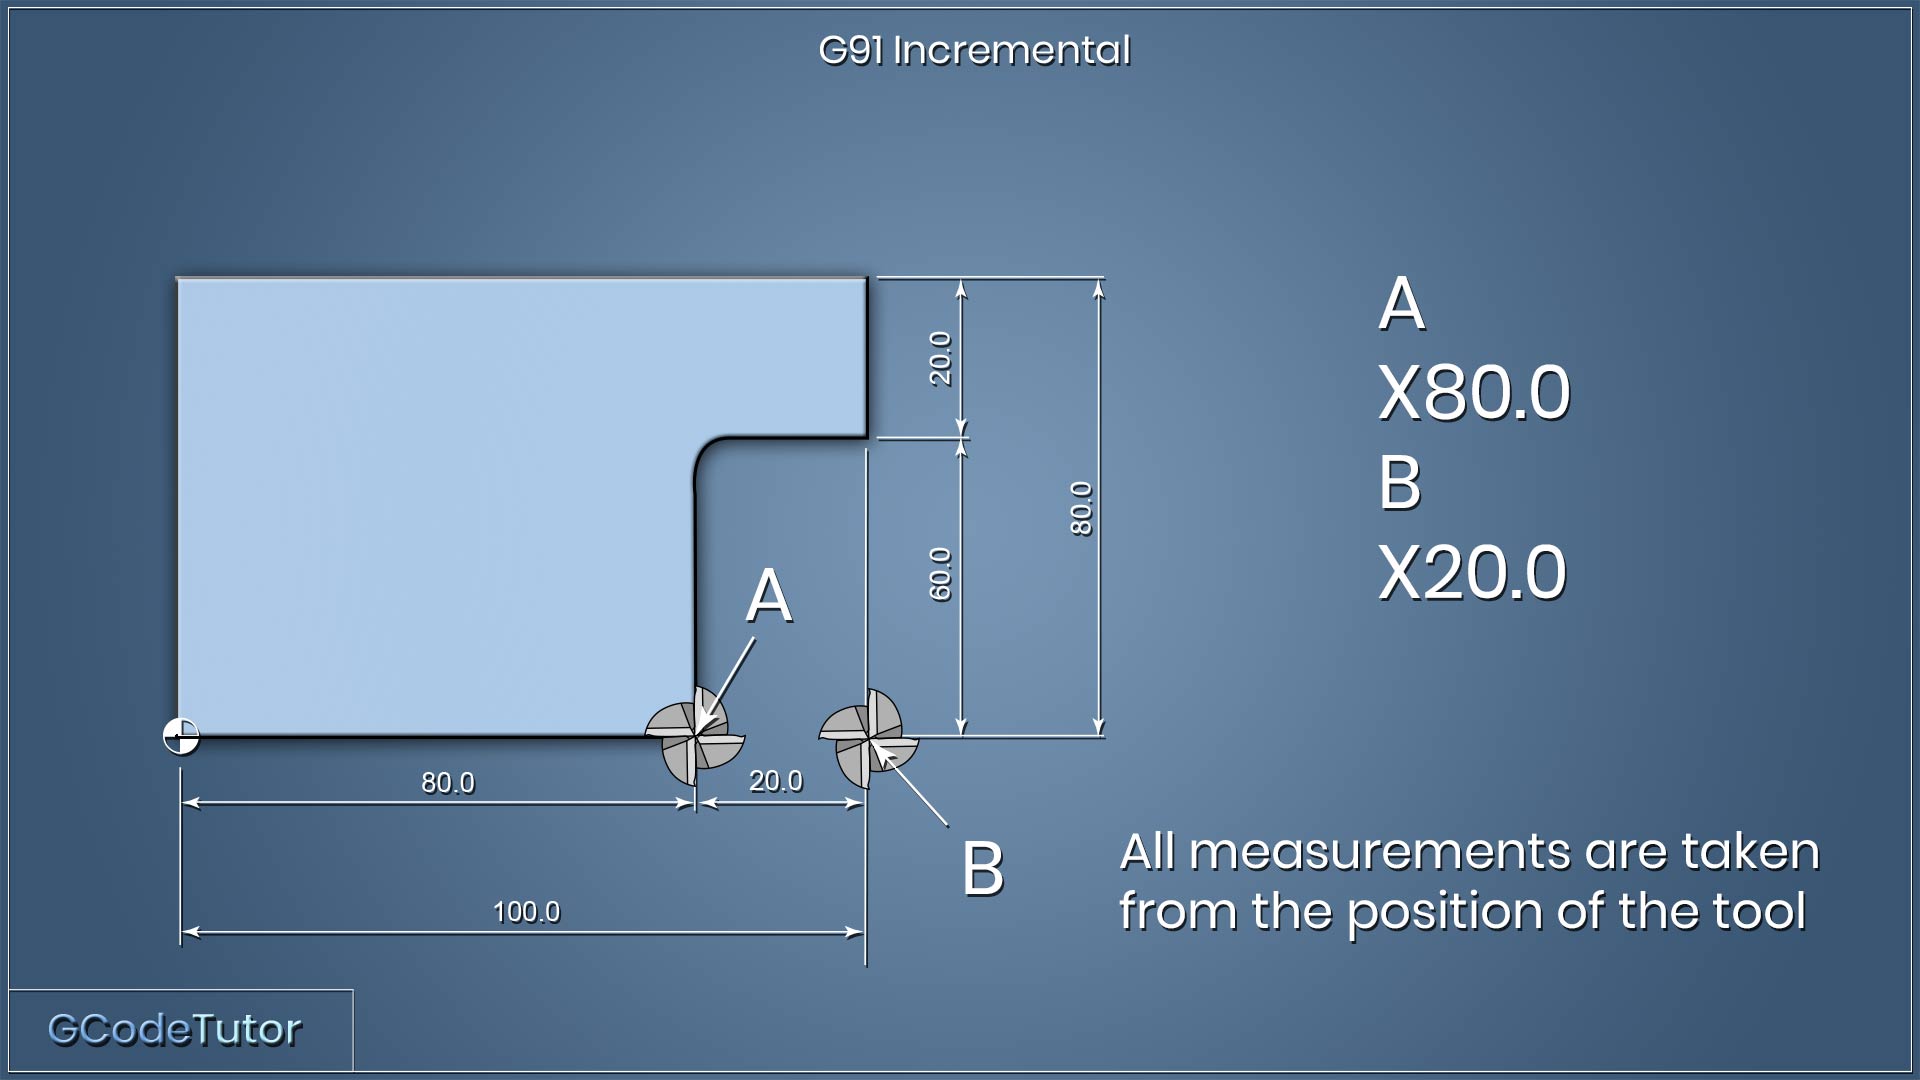 G91 incremental coordinate system for a CNC machine